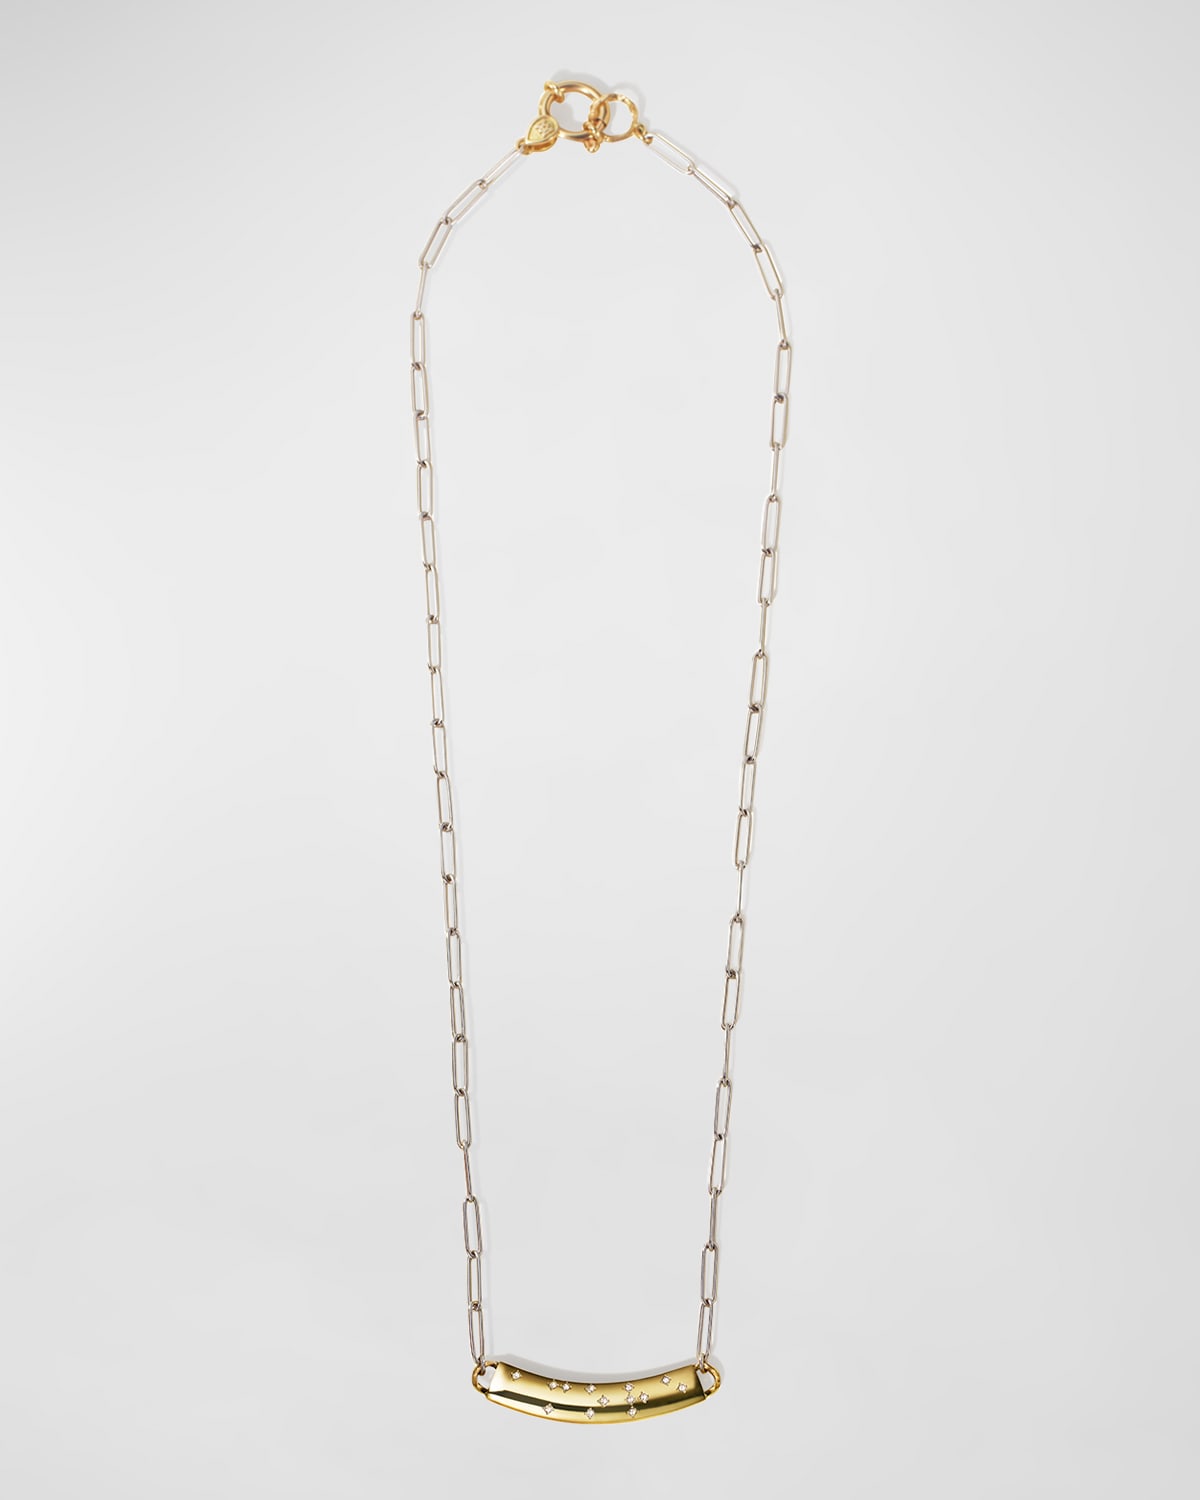 MILAMORE Diamond Braille 'Amore' Necklace